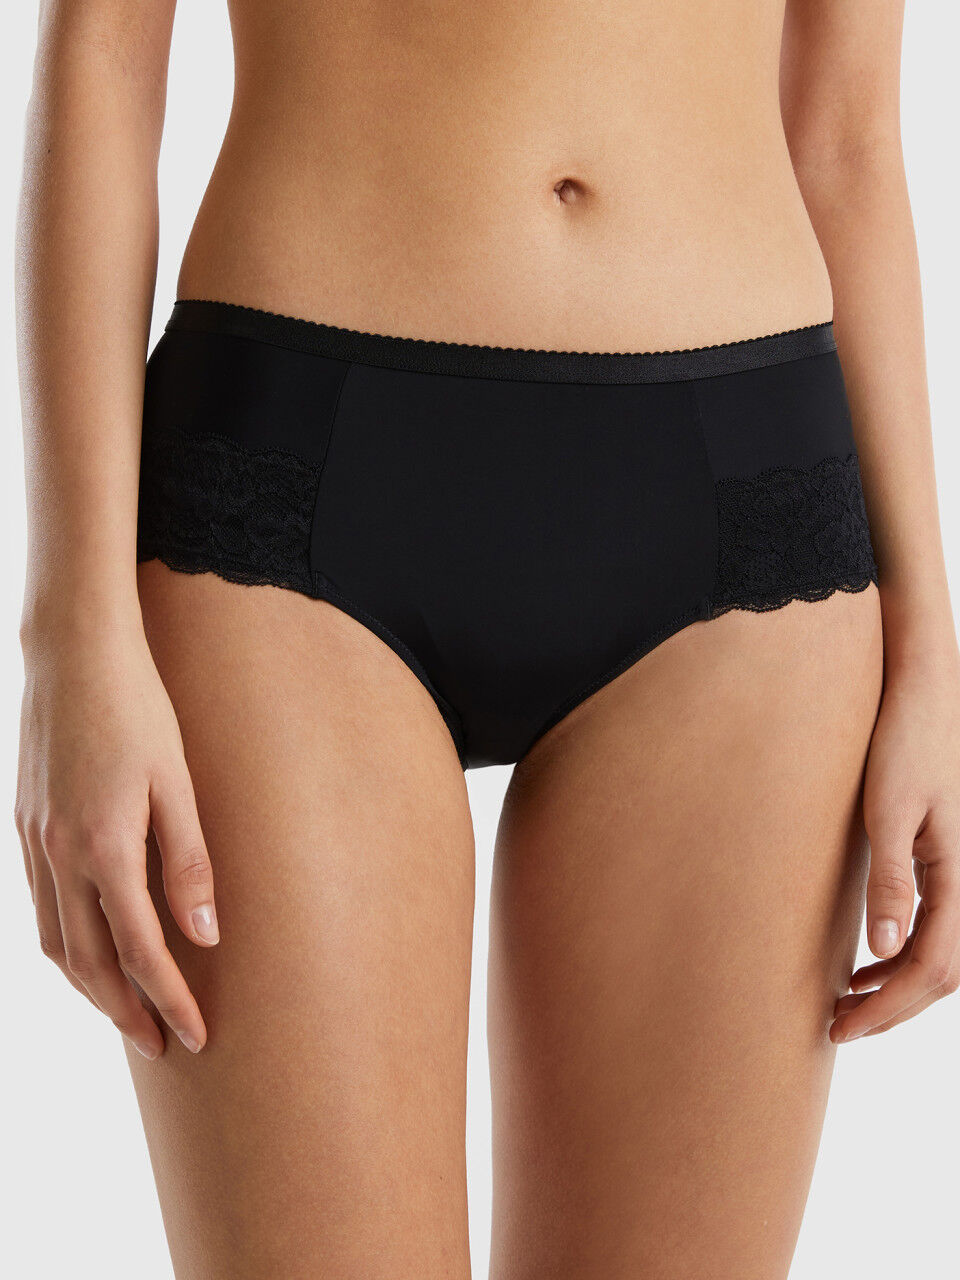 High-waisted culotte underwear with lace